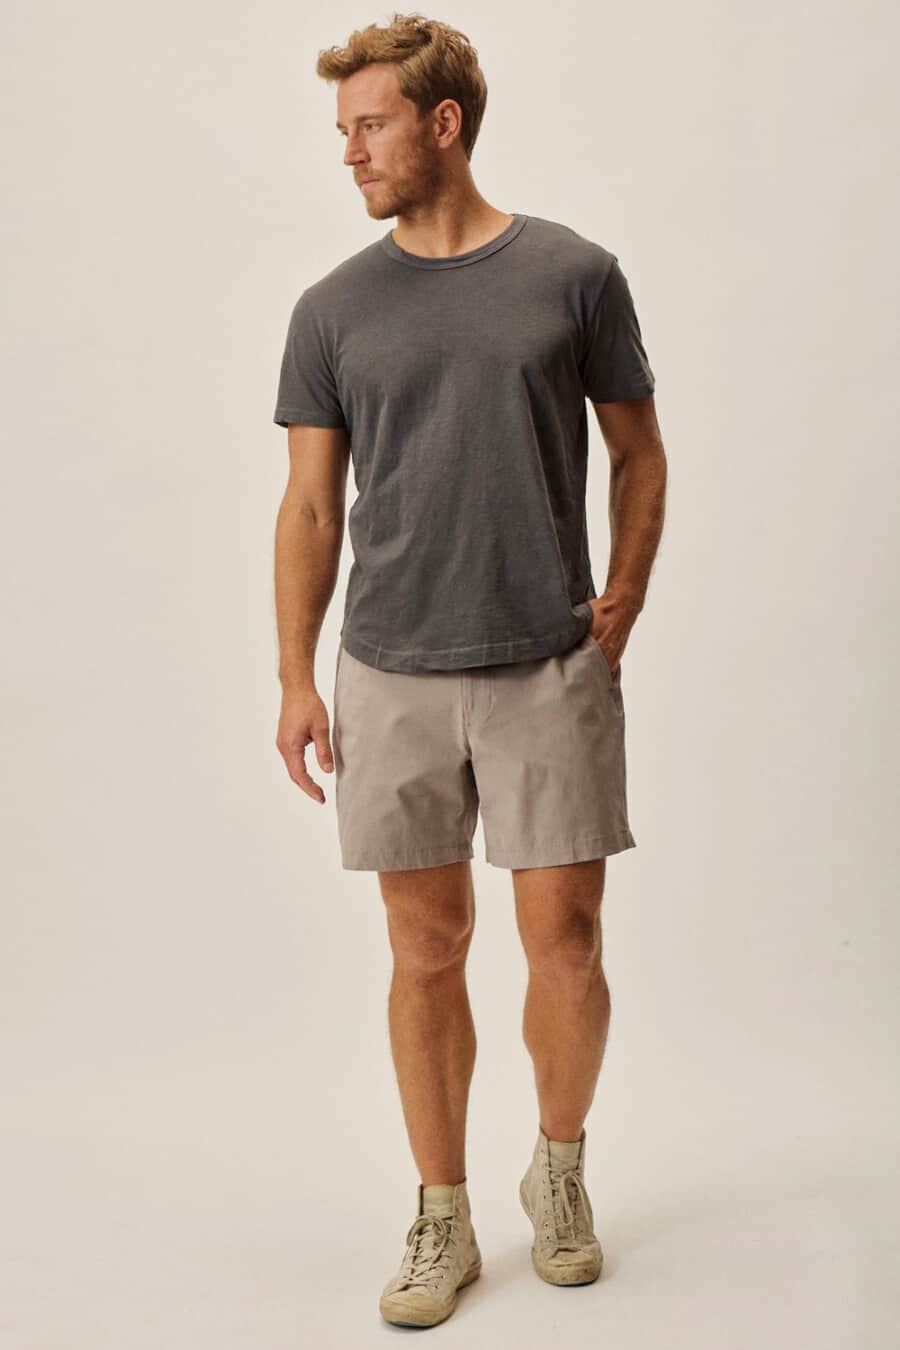 Men's light grey shorts, charcoal T-shirt and light grey high-top sneakers